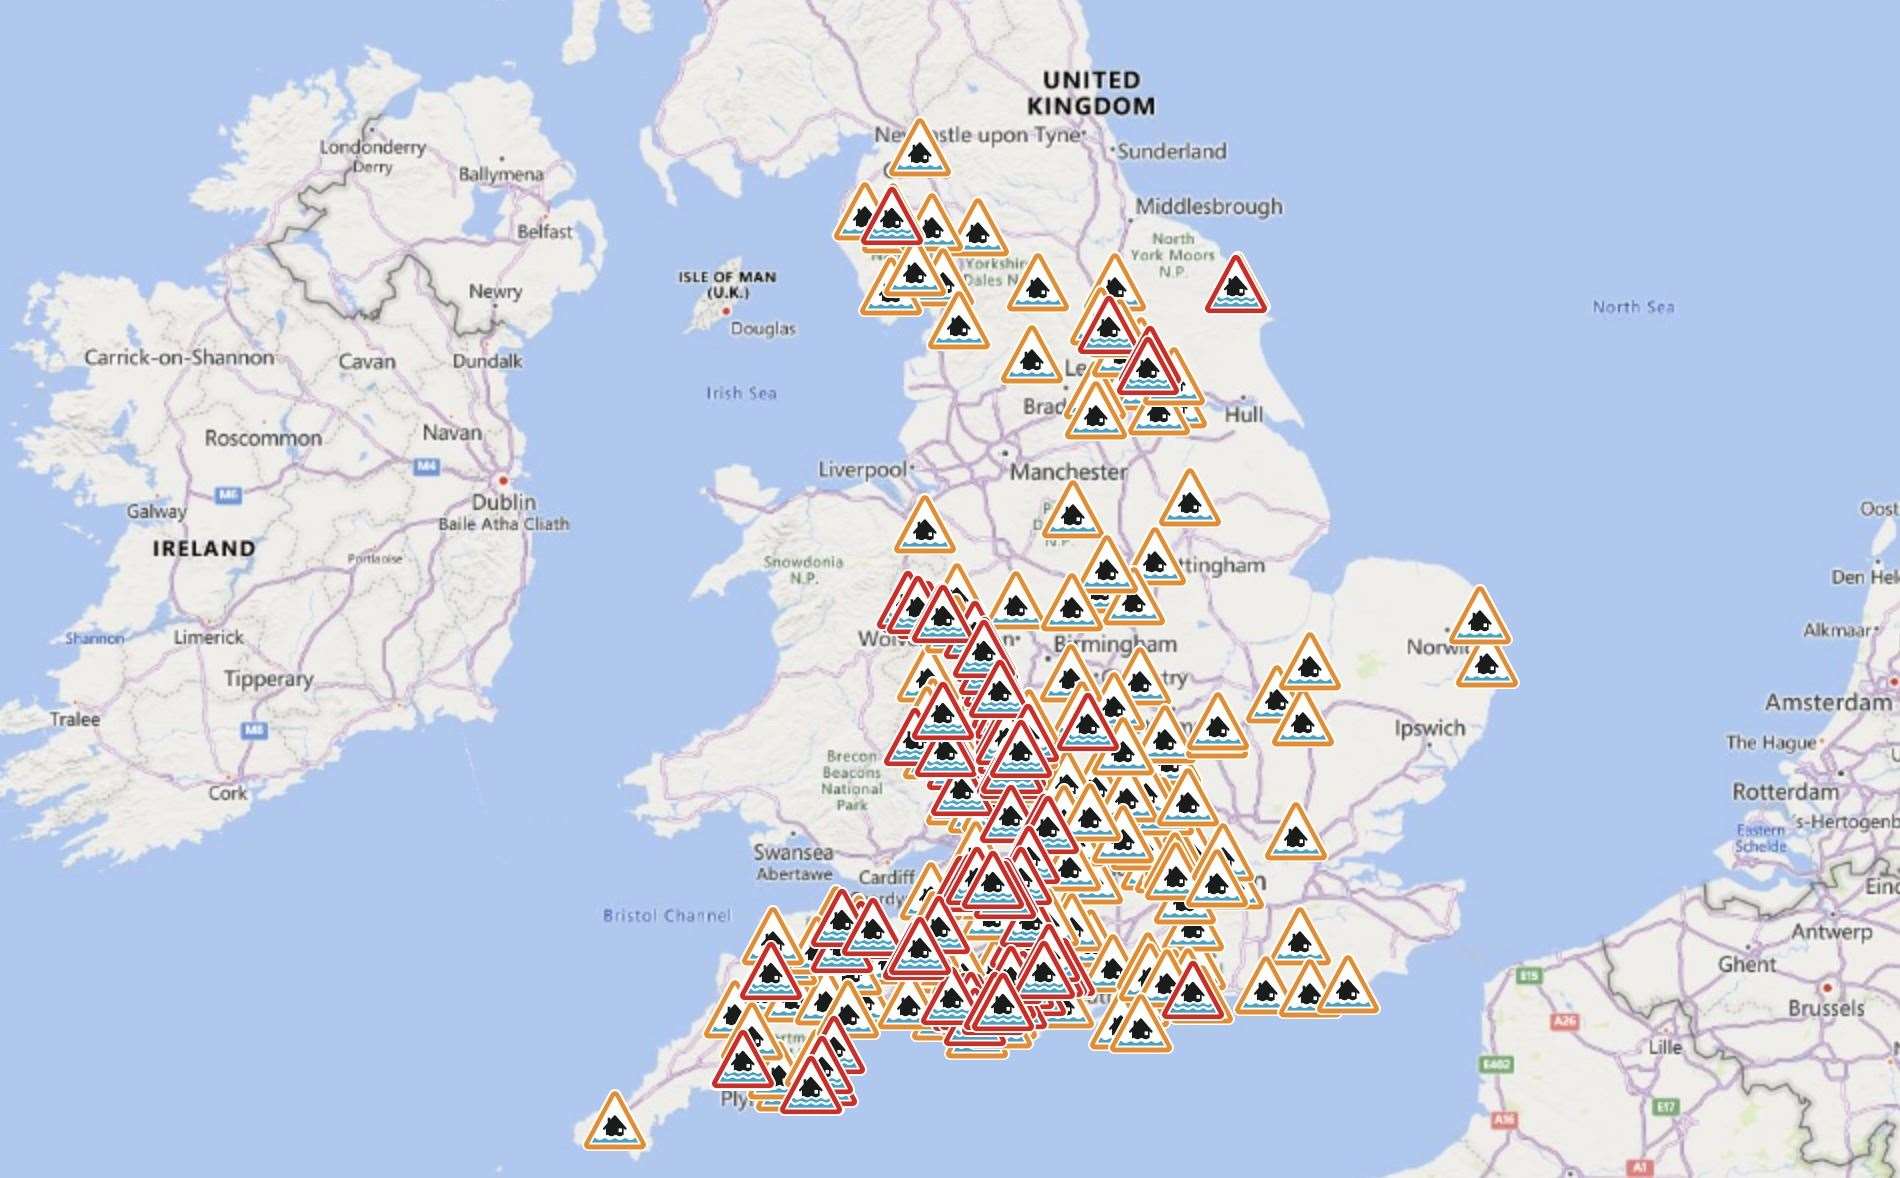 100 flood warnings and 170 flood alerts are in place across the UK. Picture: Environment Agency